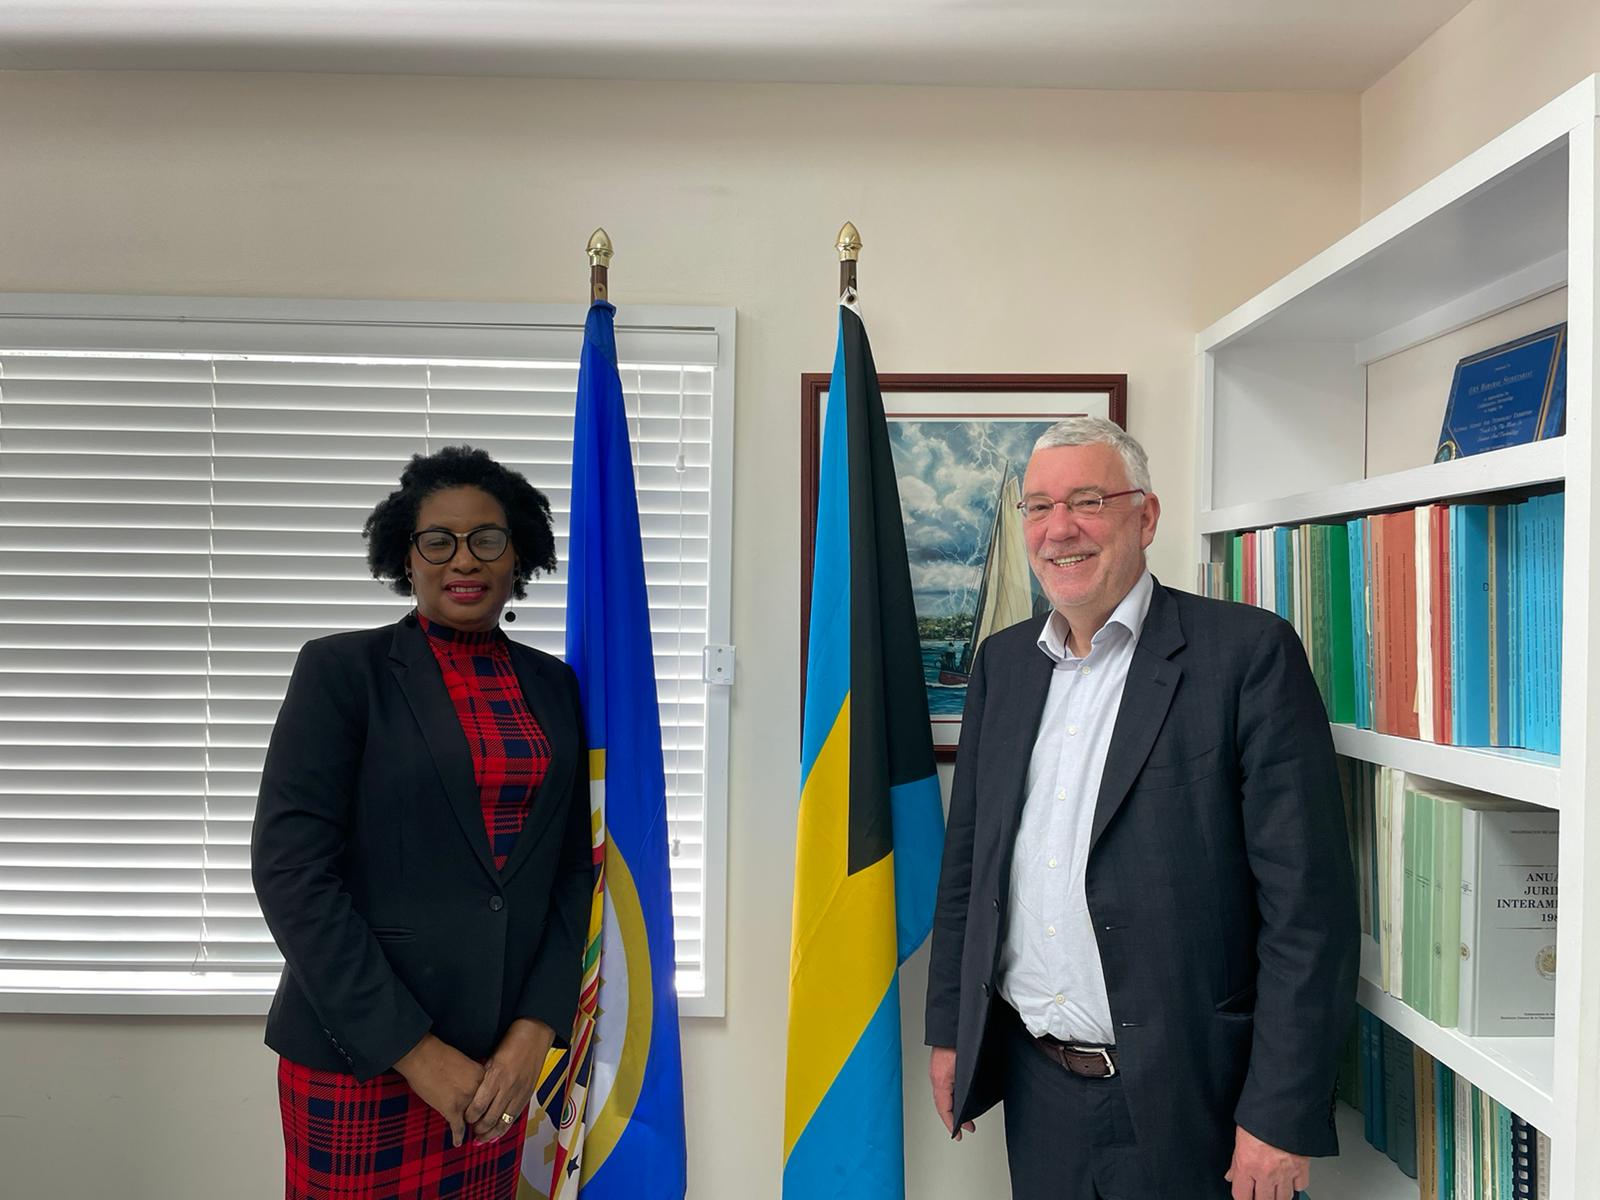 Ambassador Jean-Arthur Régibeau, Ambassador of Belgium to the Commonwealth of The Bahamas, and Permanent Observer for Belgium to the OAS paid a courtesy call to Representative Phyllis Baron at the OAS National Office in The Bahamas during his recent visit.